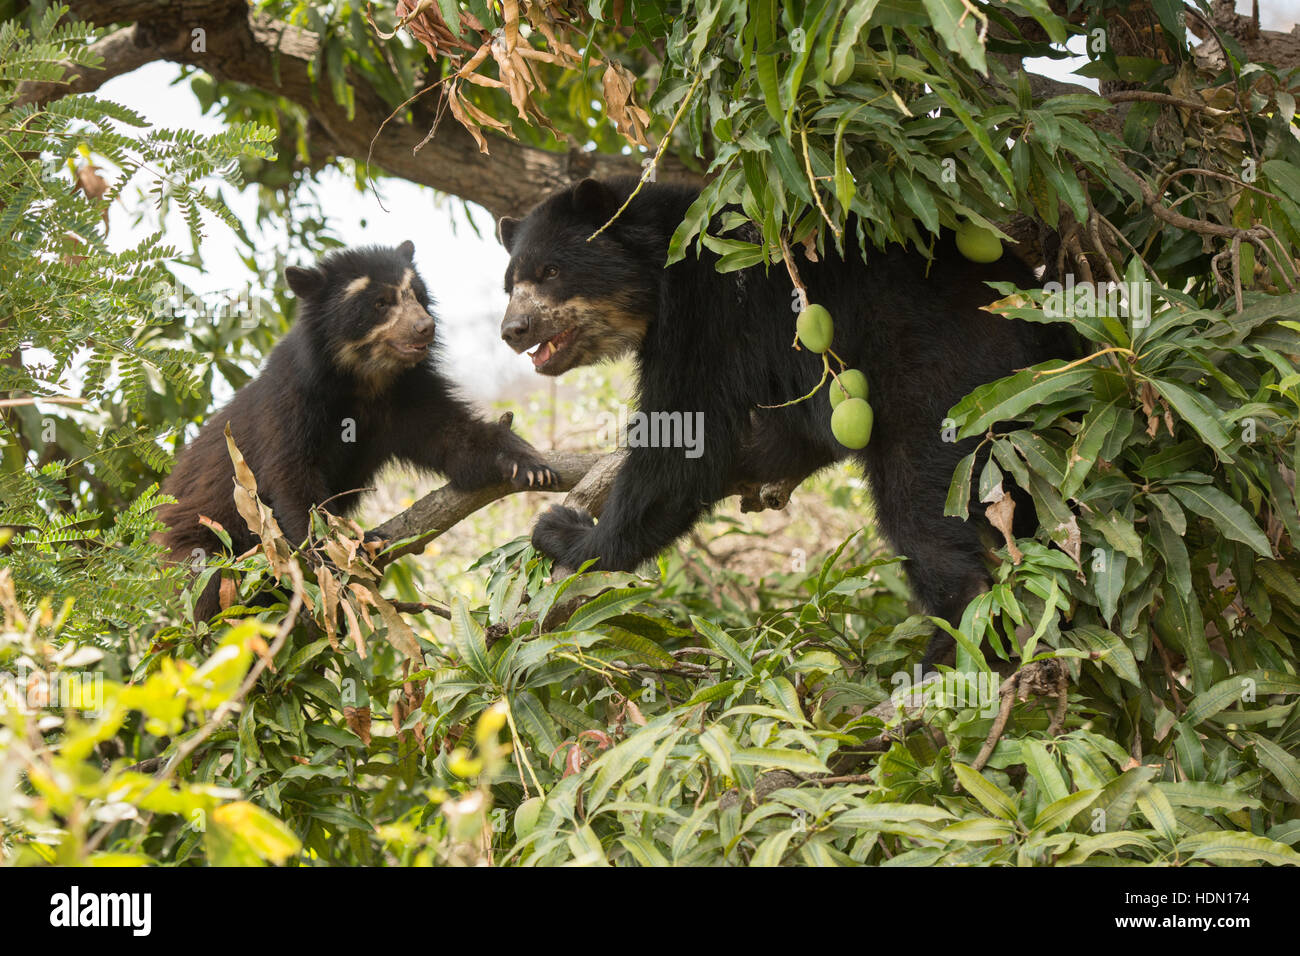 Two Peruvian Spectacled Bears or Andean Bears (Tremarctos ornatus) in a mango tree at Chaparri Reserve in northern Peru Stock Photo